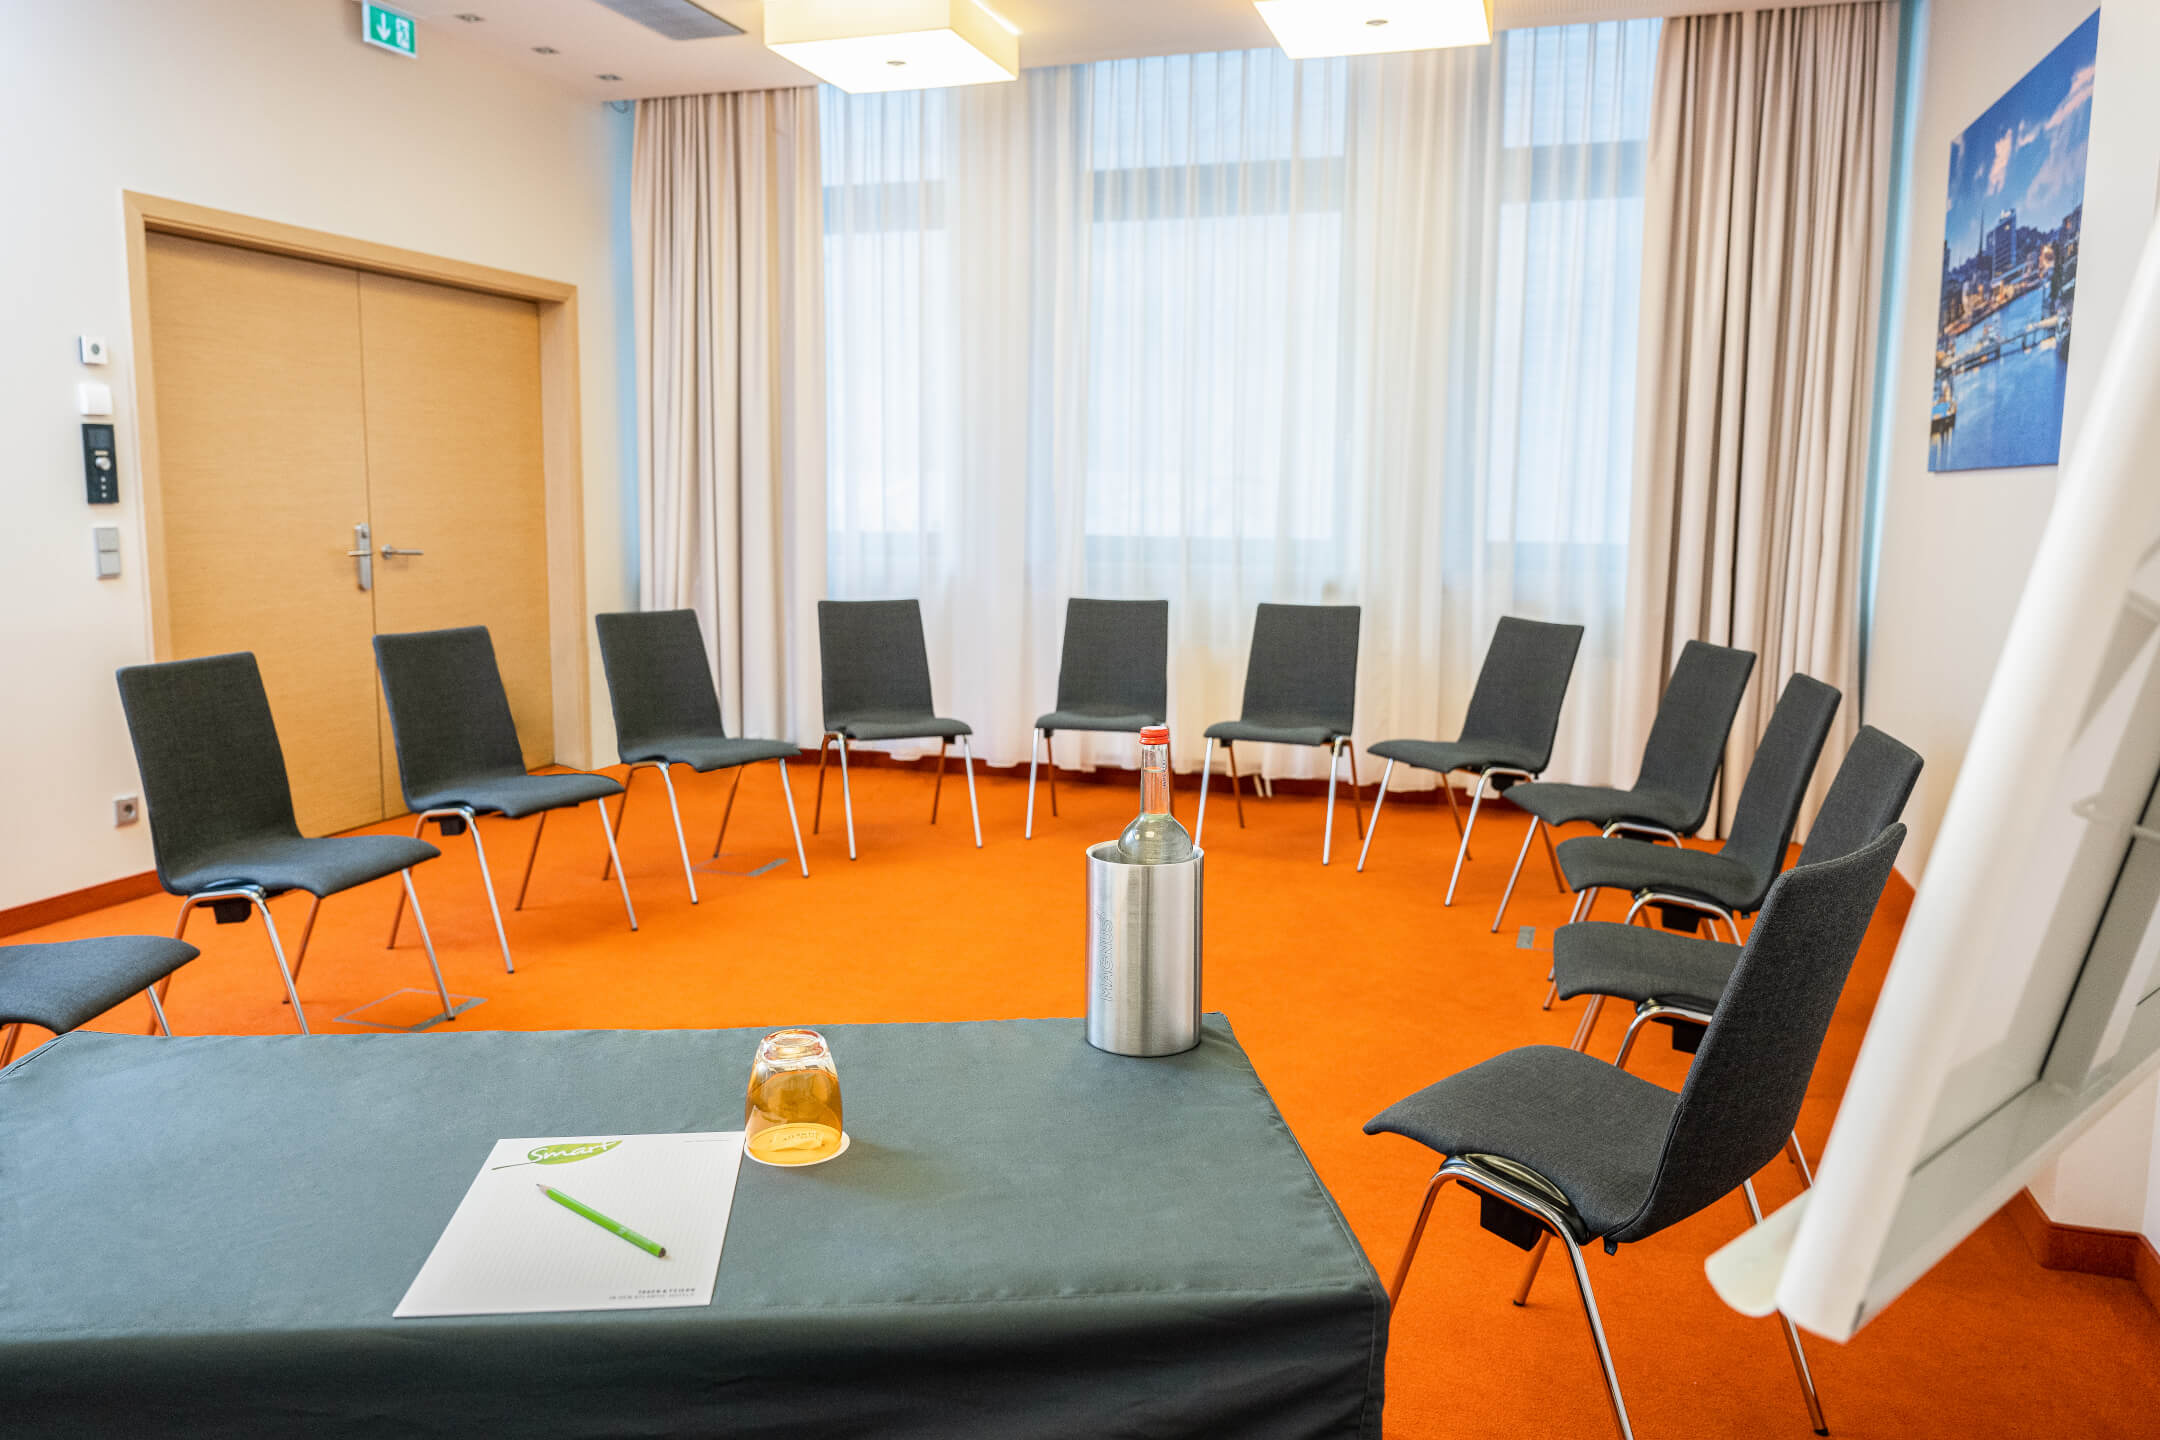 Chairs in the conference room at the ATLANTIC Hotel Kiel